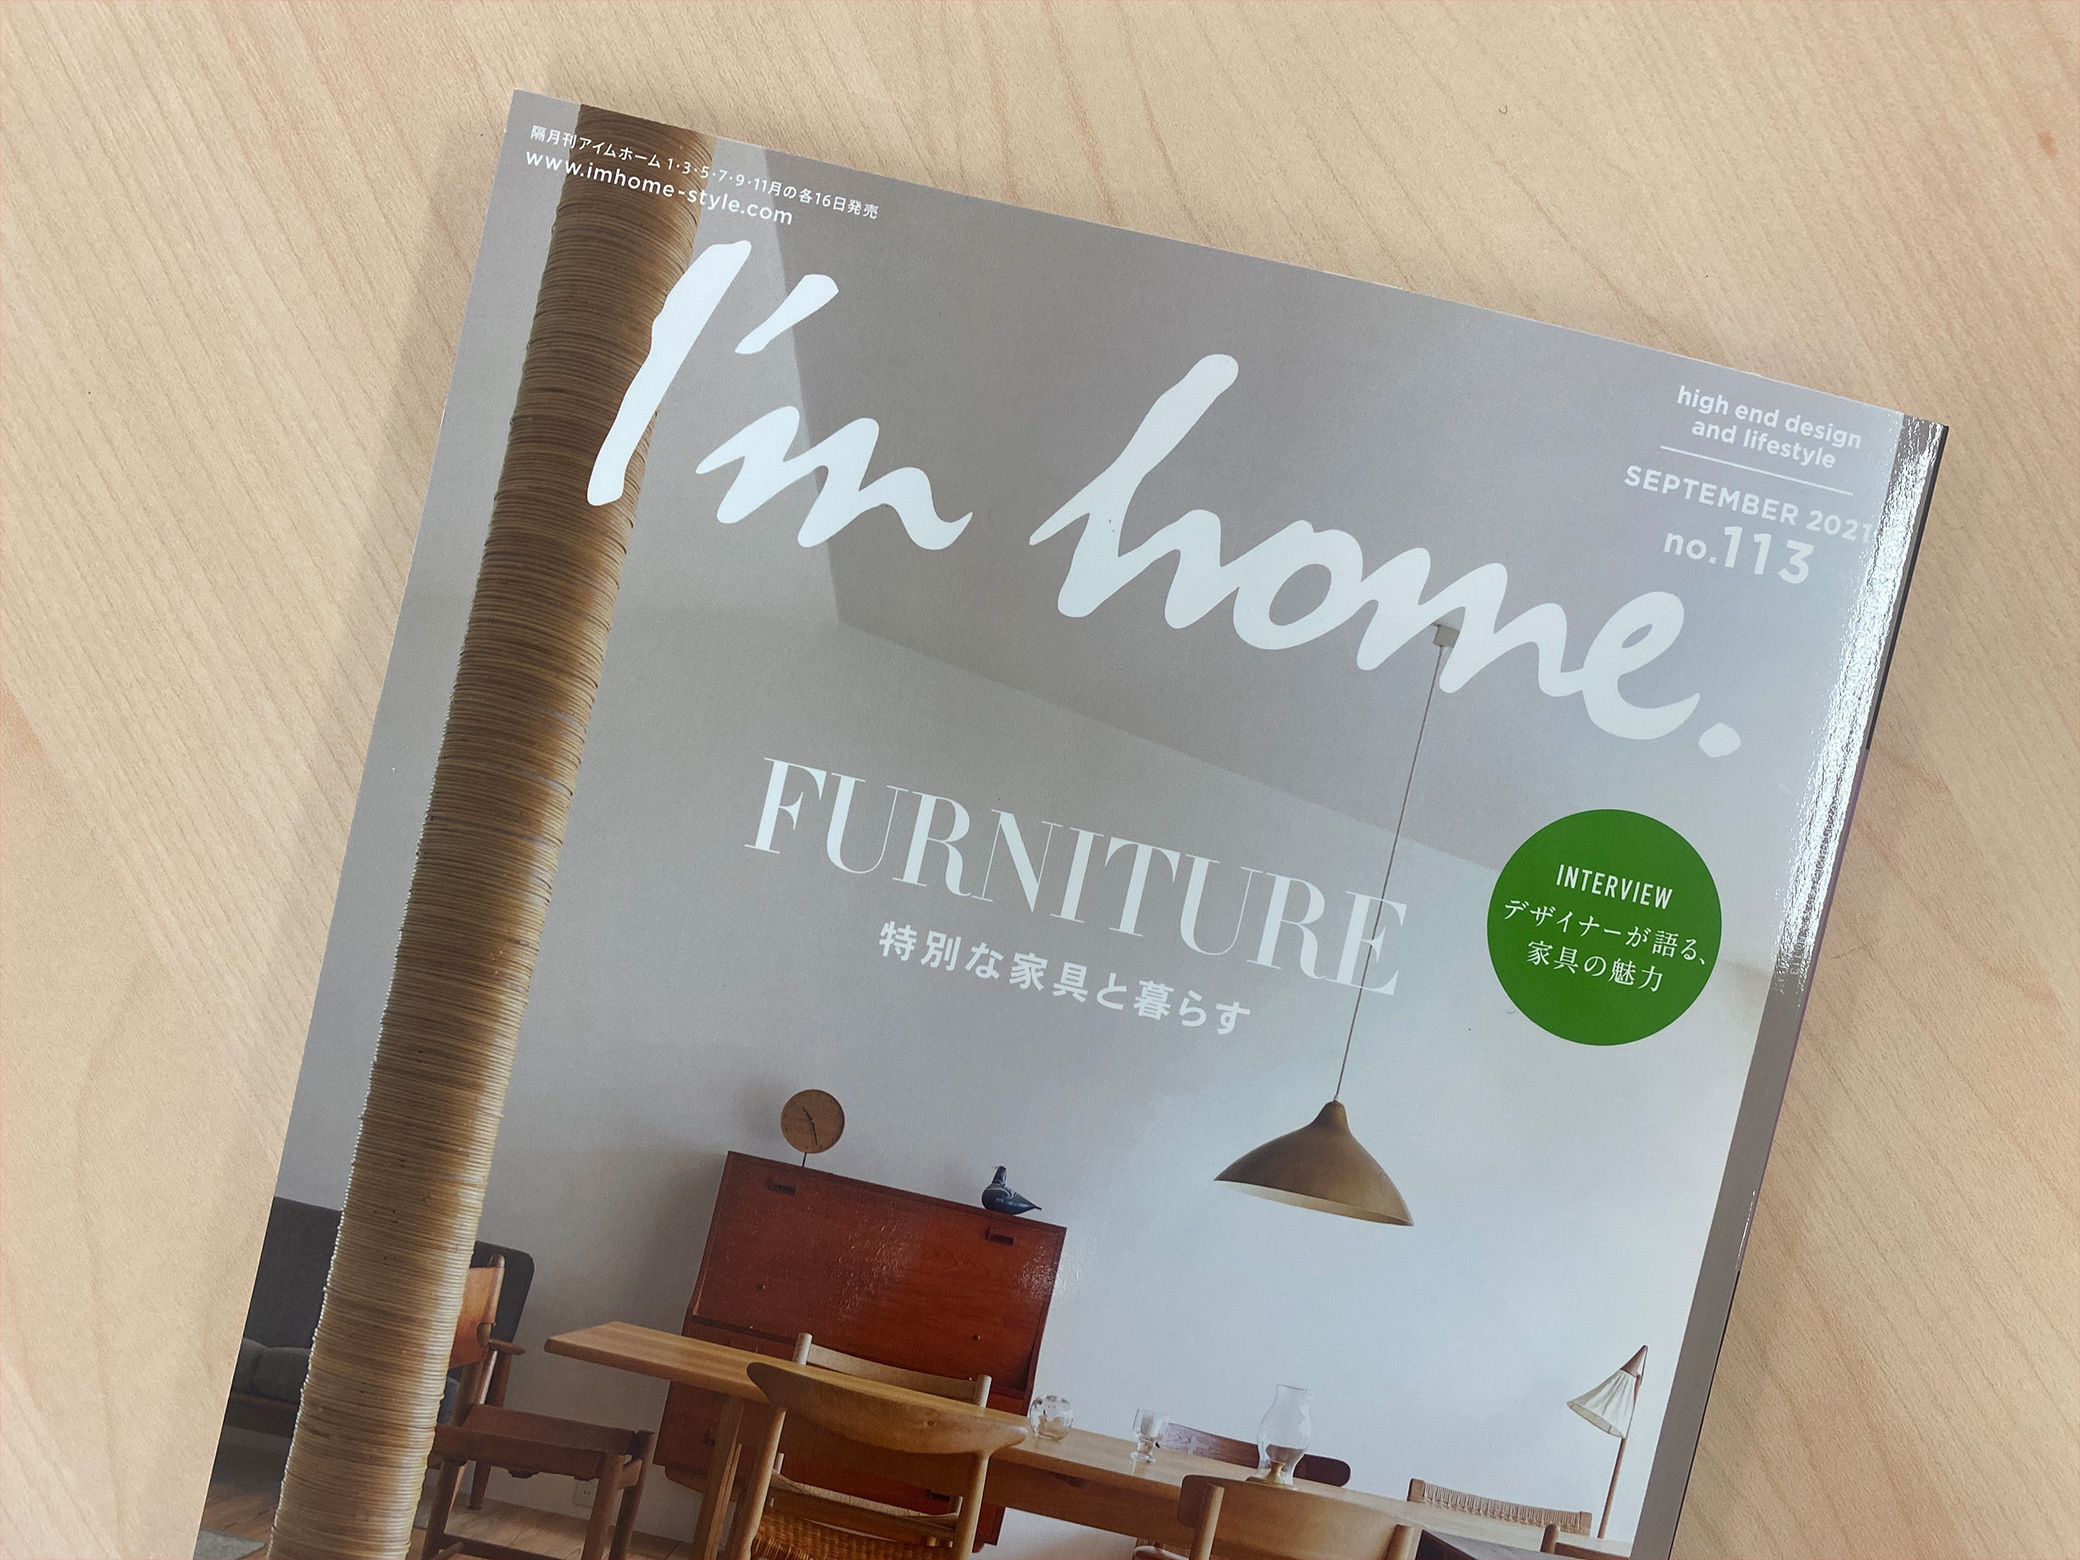 What is sustainable in furniture? / On the occasion of the publication of I’m home July issue